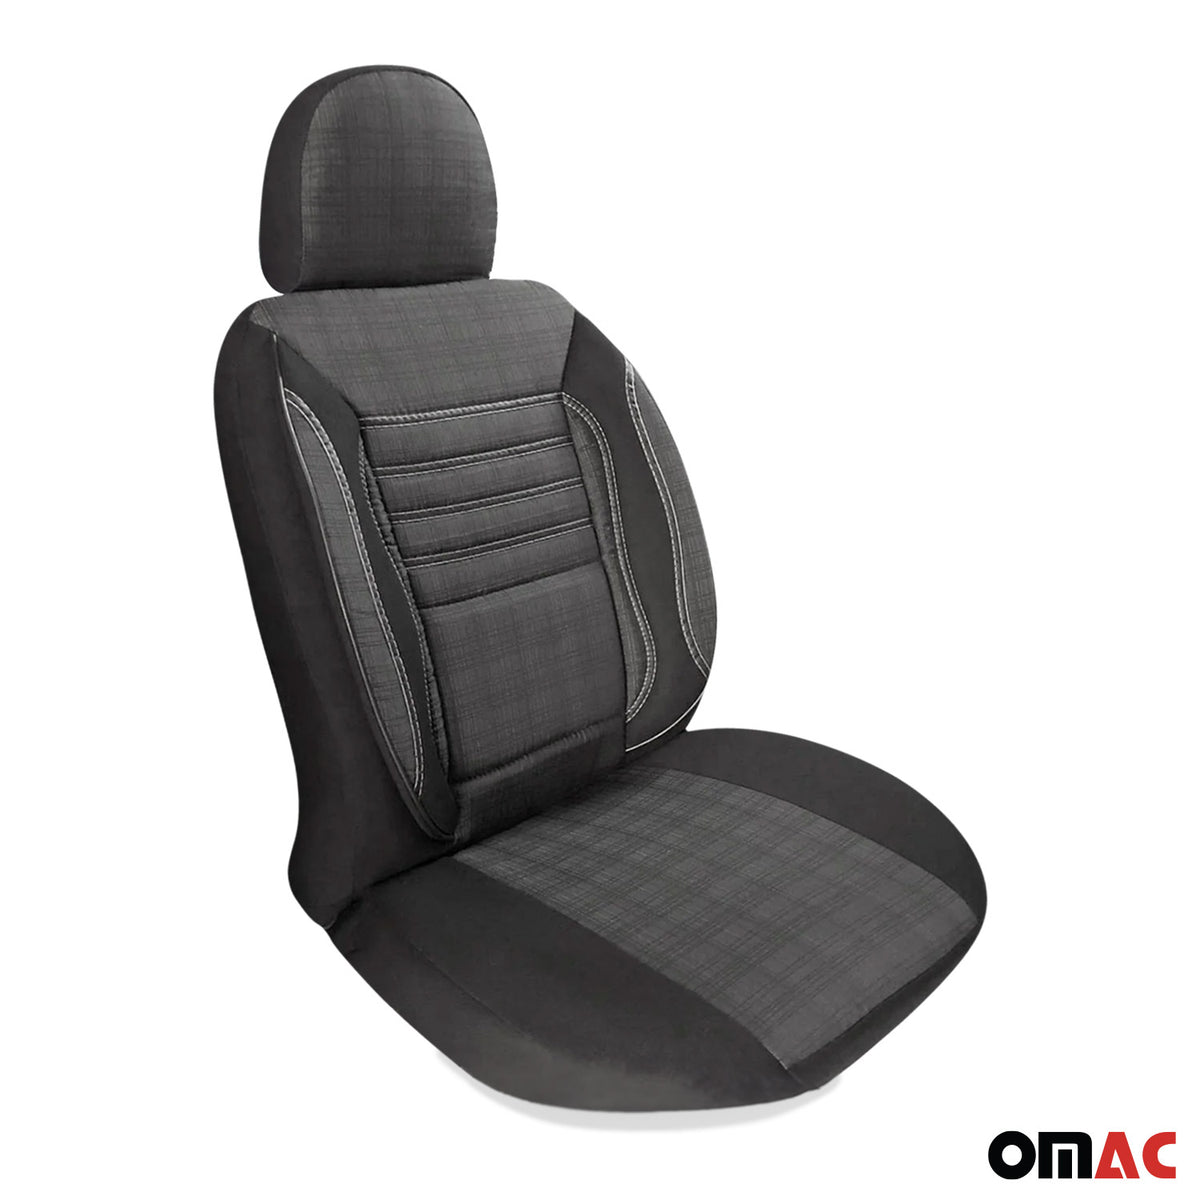 Protective covers seat covers for VW Transporter T5 2003-2015 smoke gray 1 seat